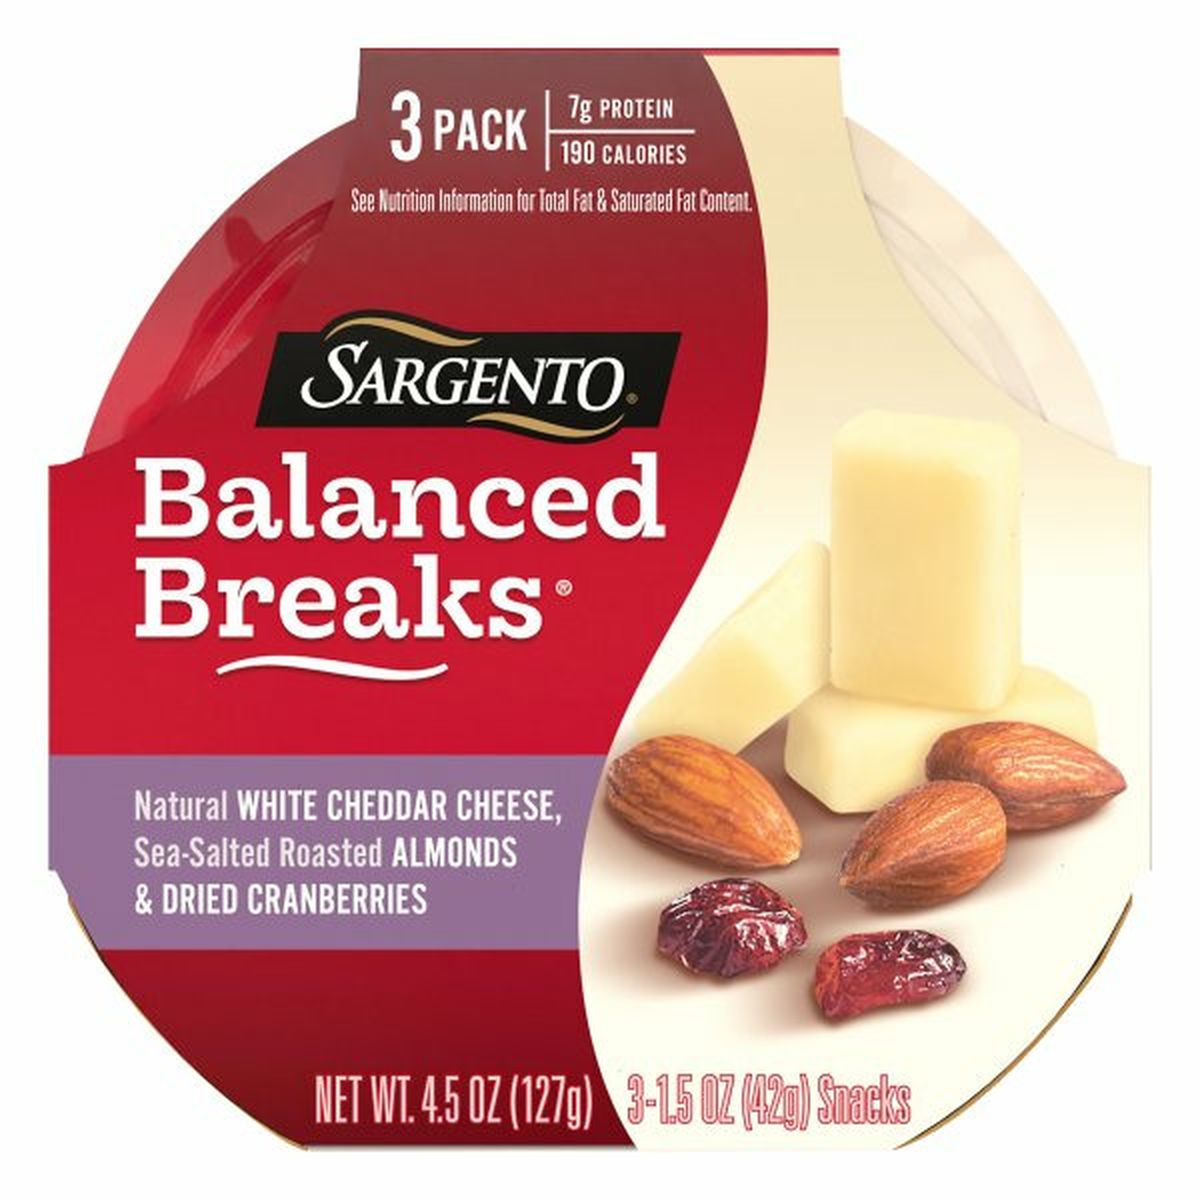 Calories in Sargentos Balanced Breaks, White Cheddar/Almonds/Cranberries, 3 Pack